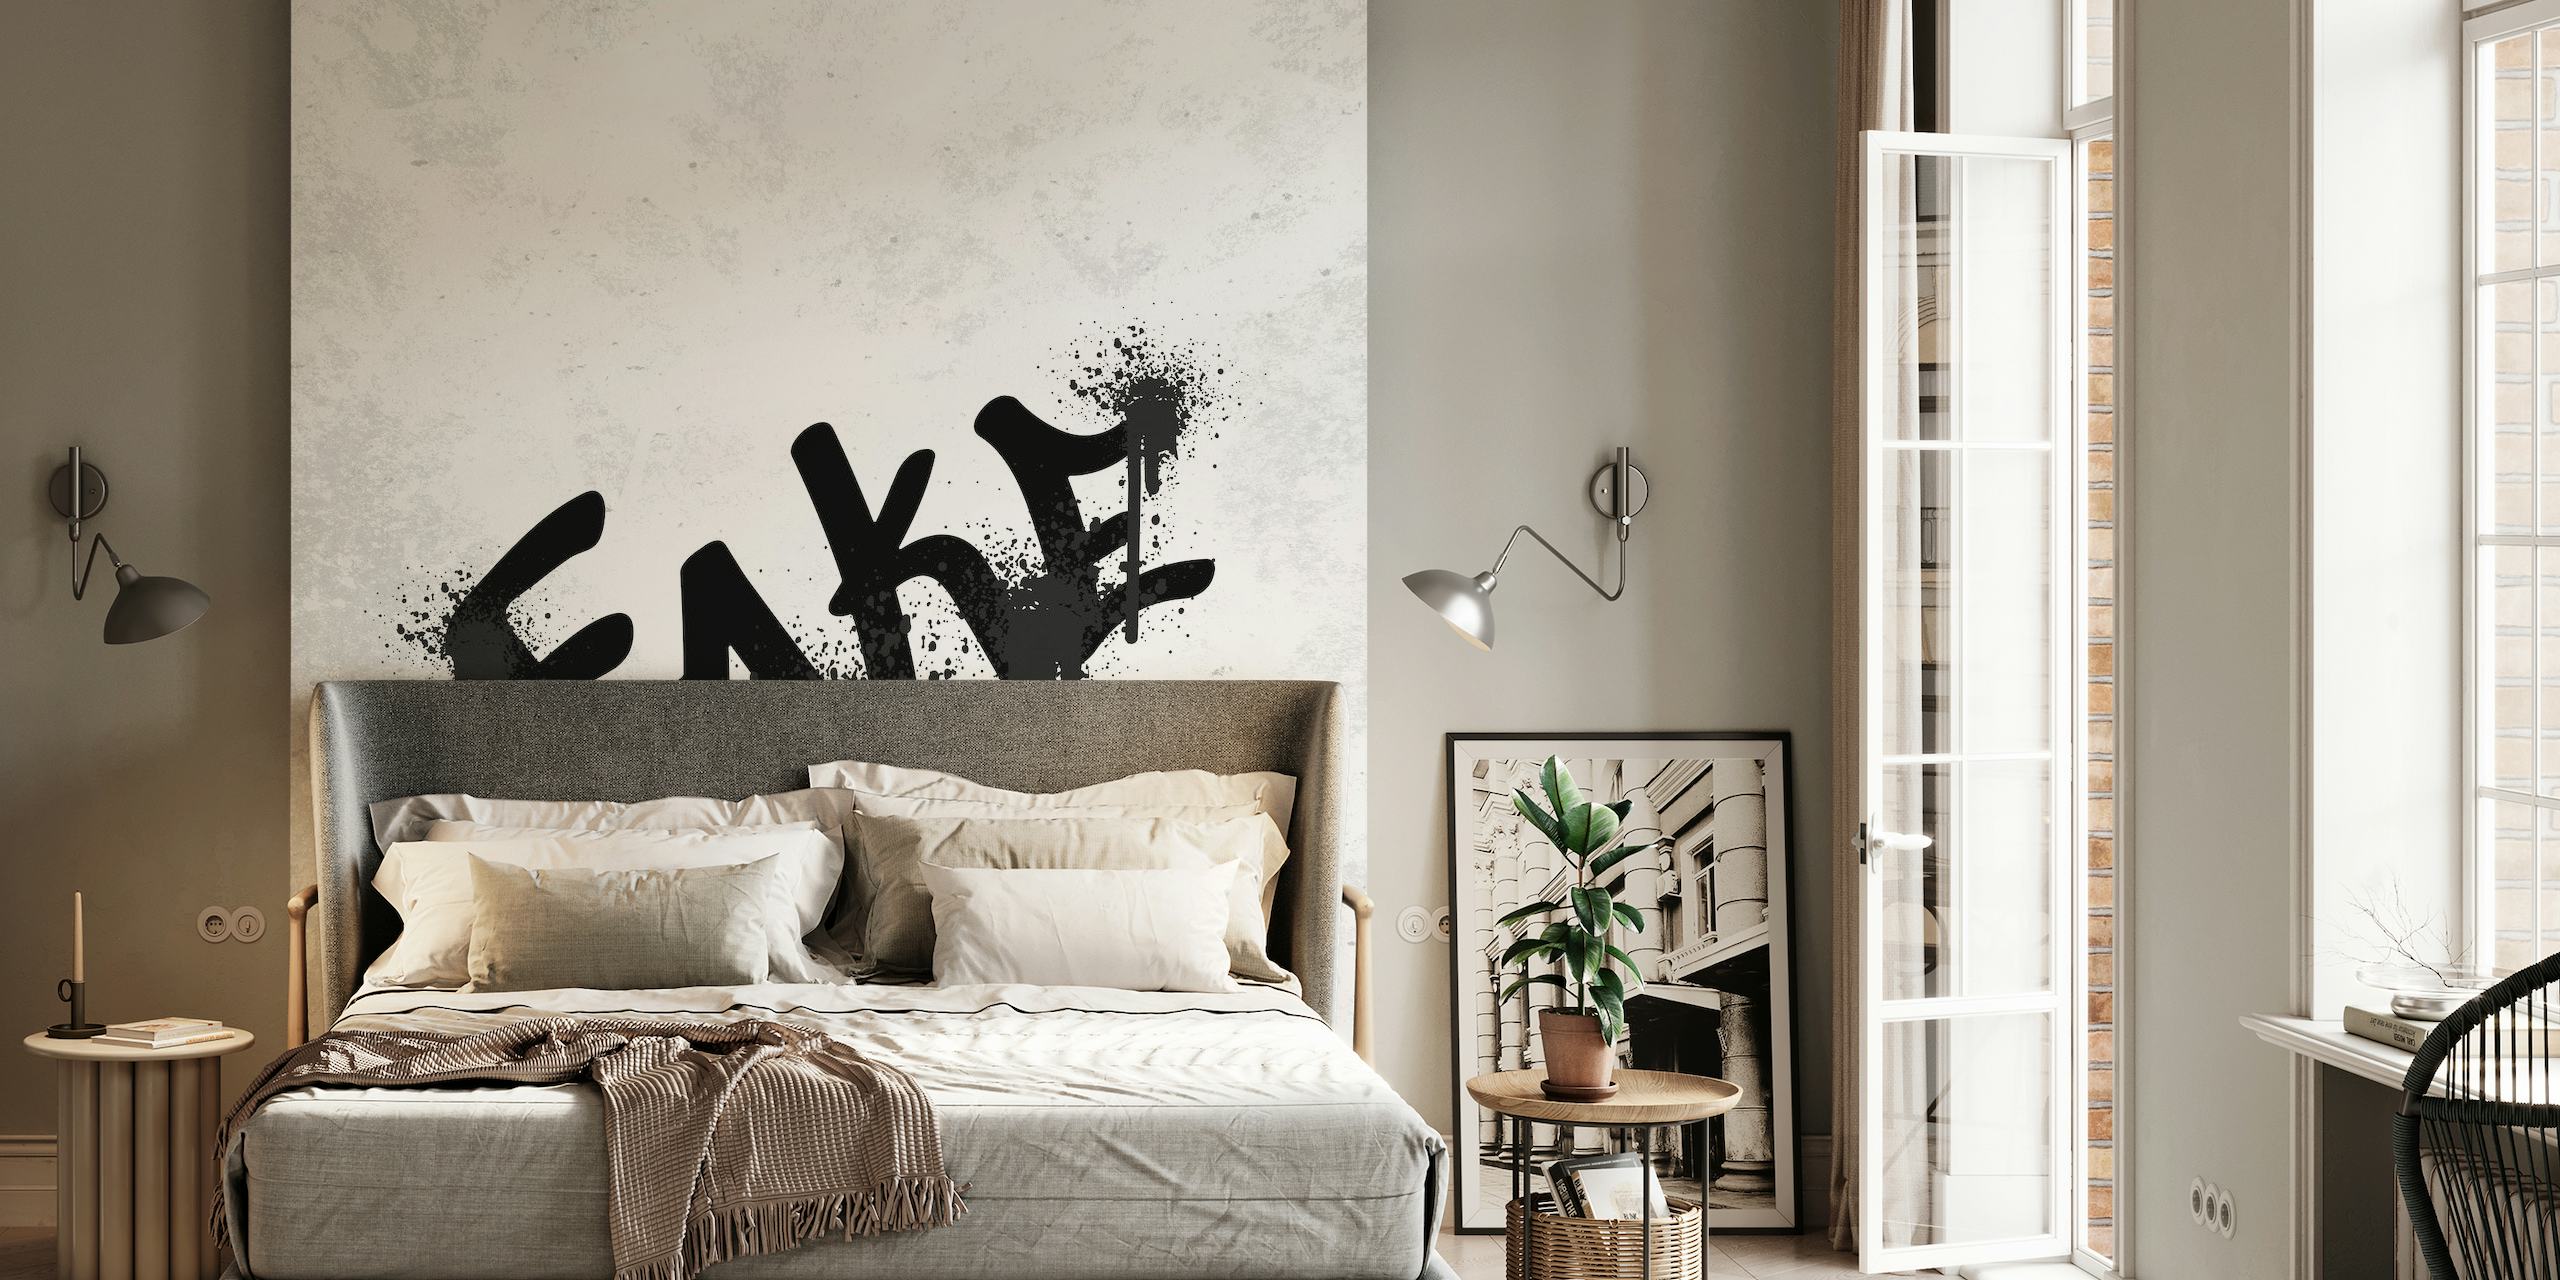 Black graffiti reading 'FAKE' on a white marble textured background wall mural